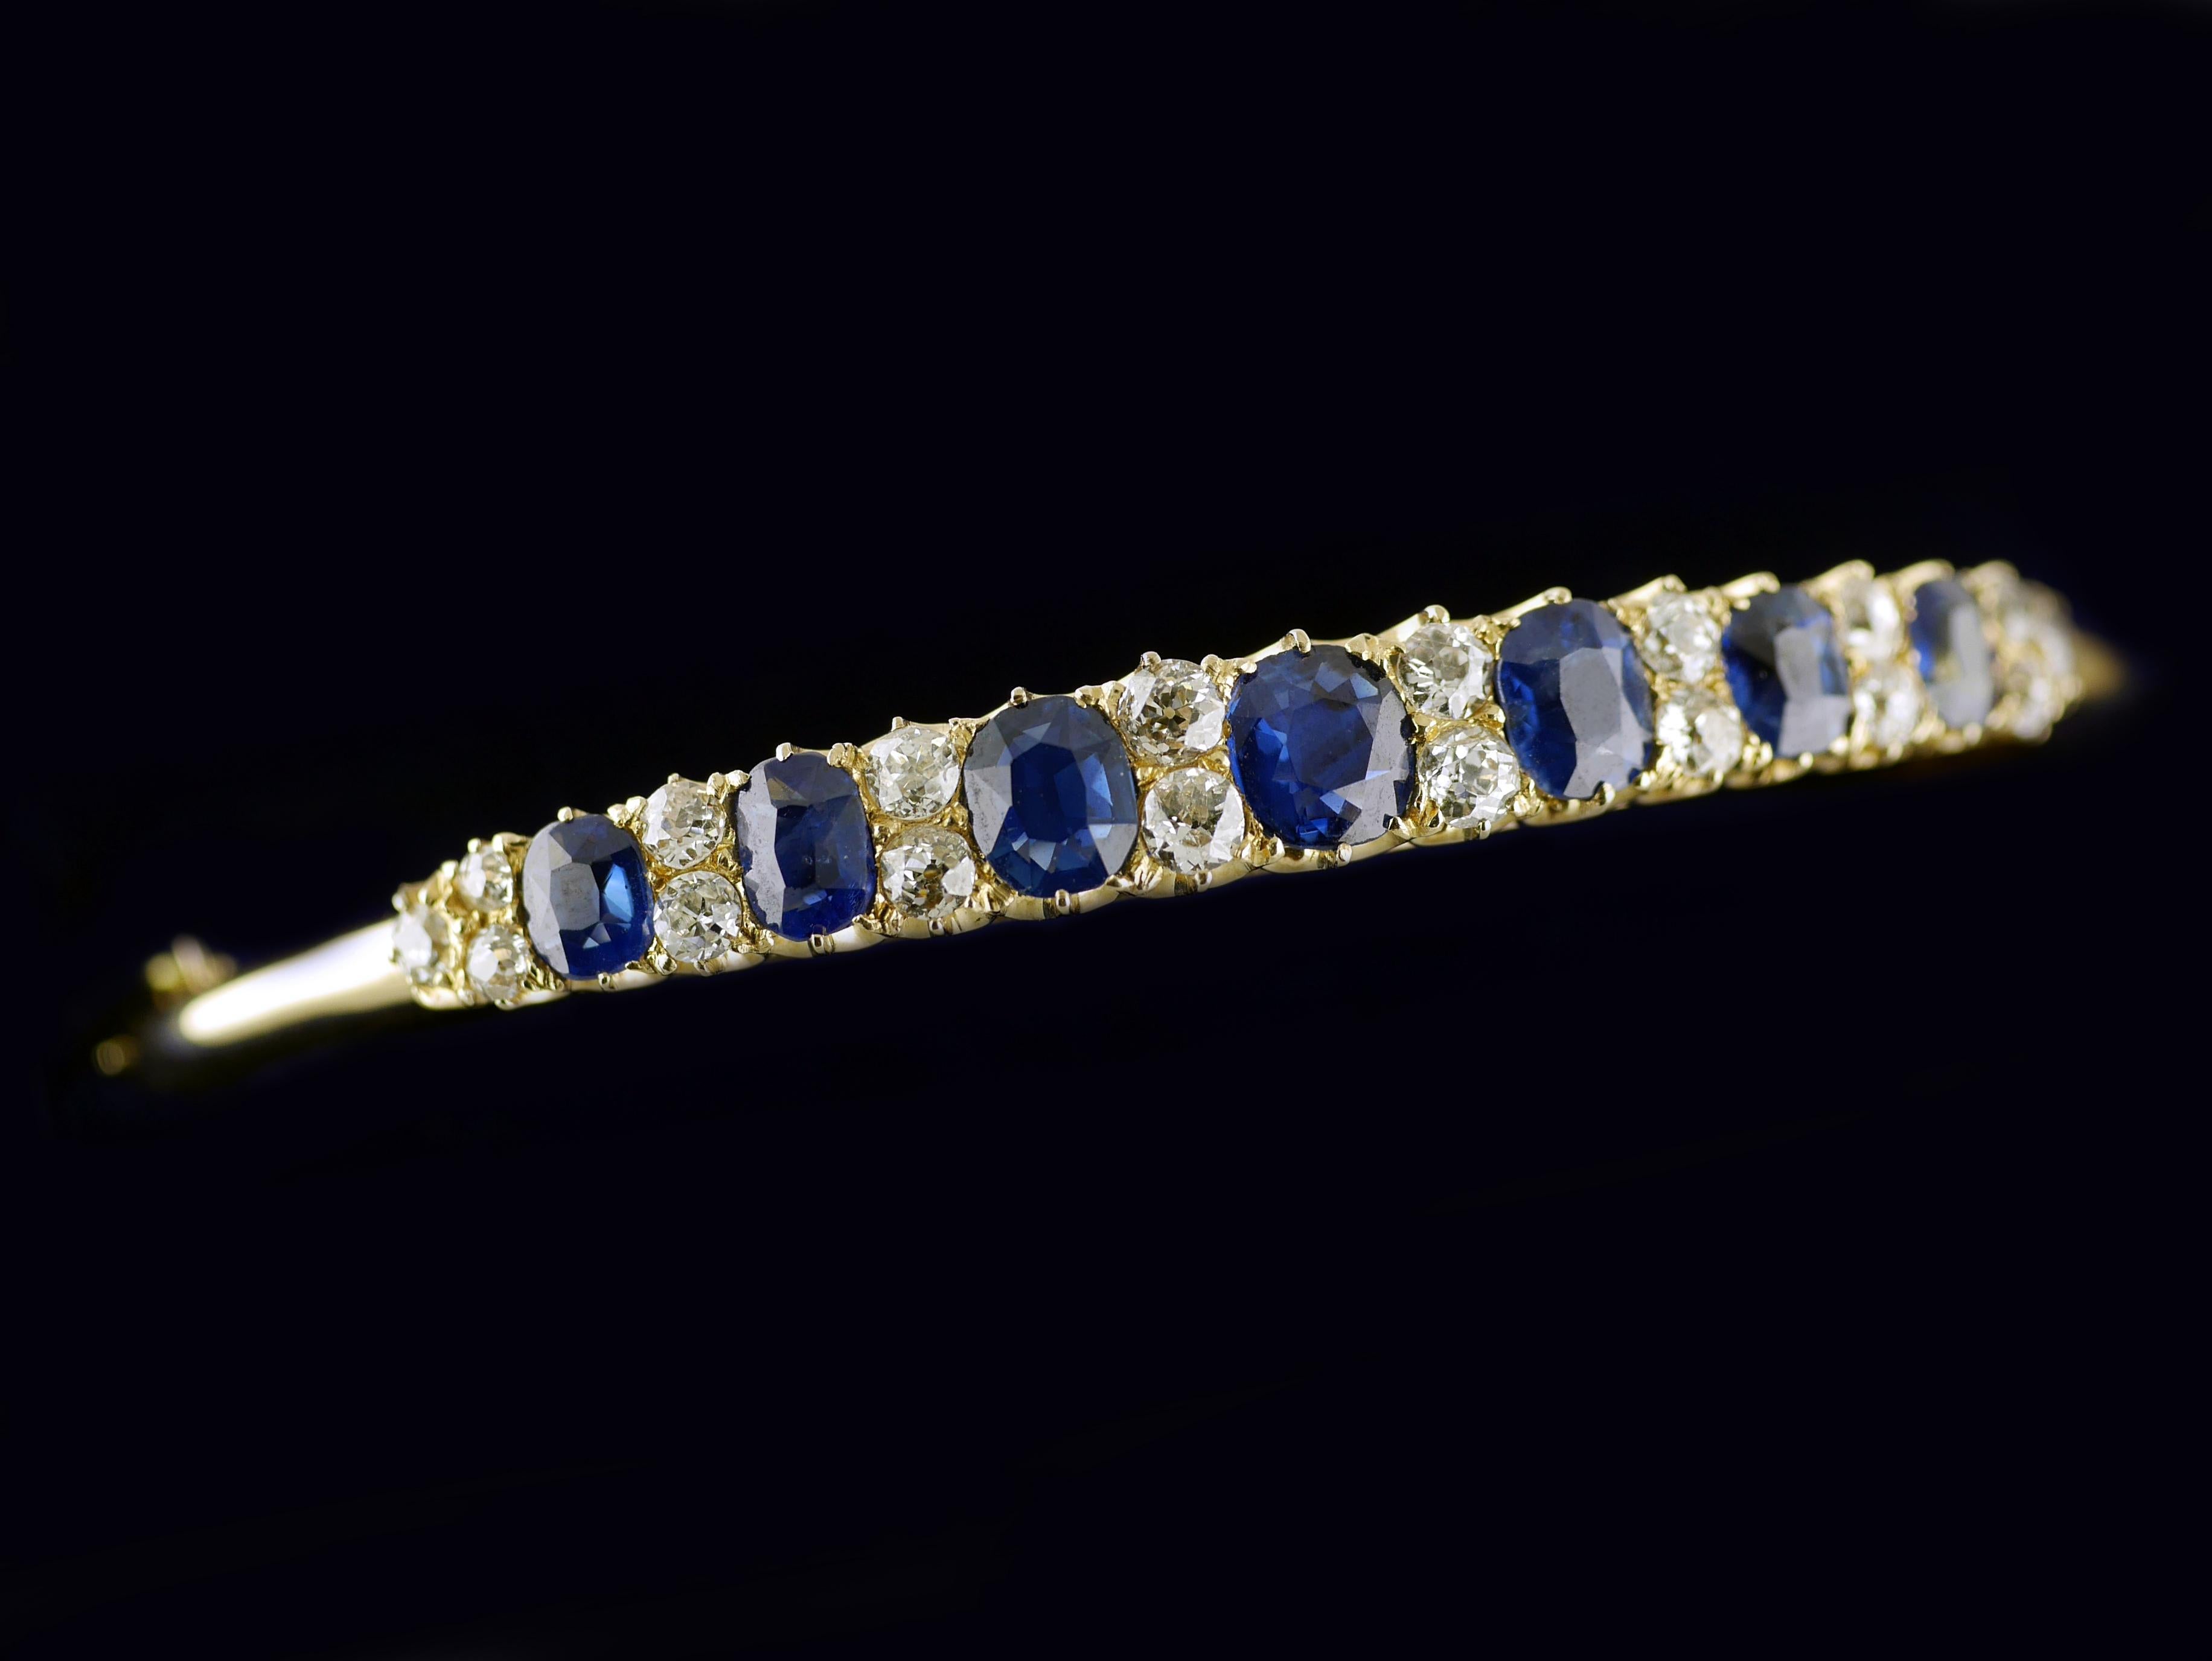 Yellow Gold Victorian Natural Untreated Sapphire Diamond Bangle circa 1860 In Excellent Condition For Sale In London, GB